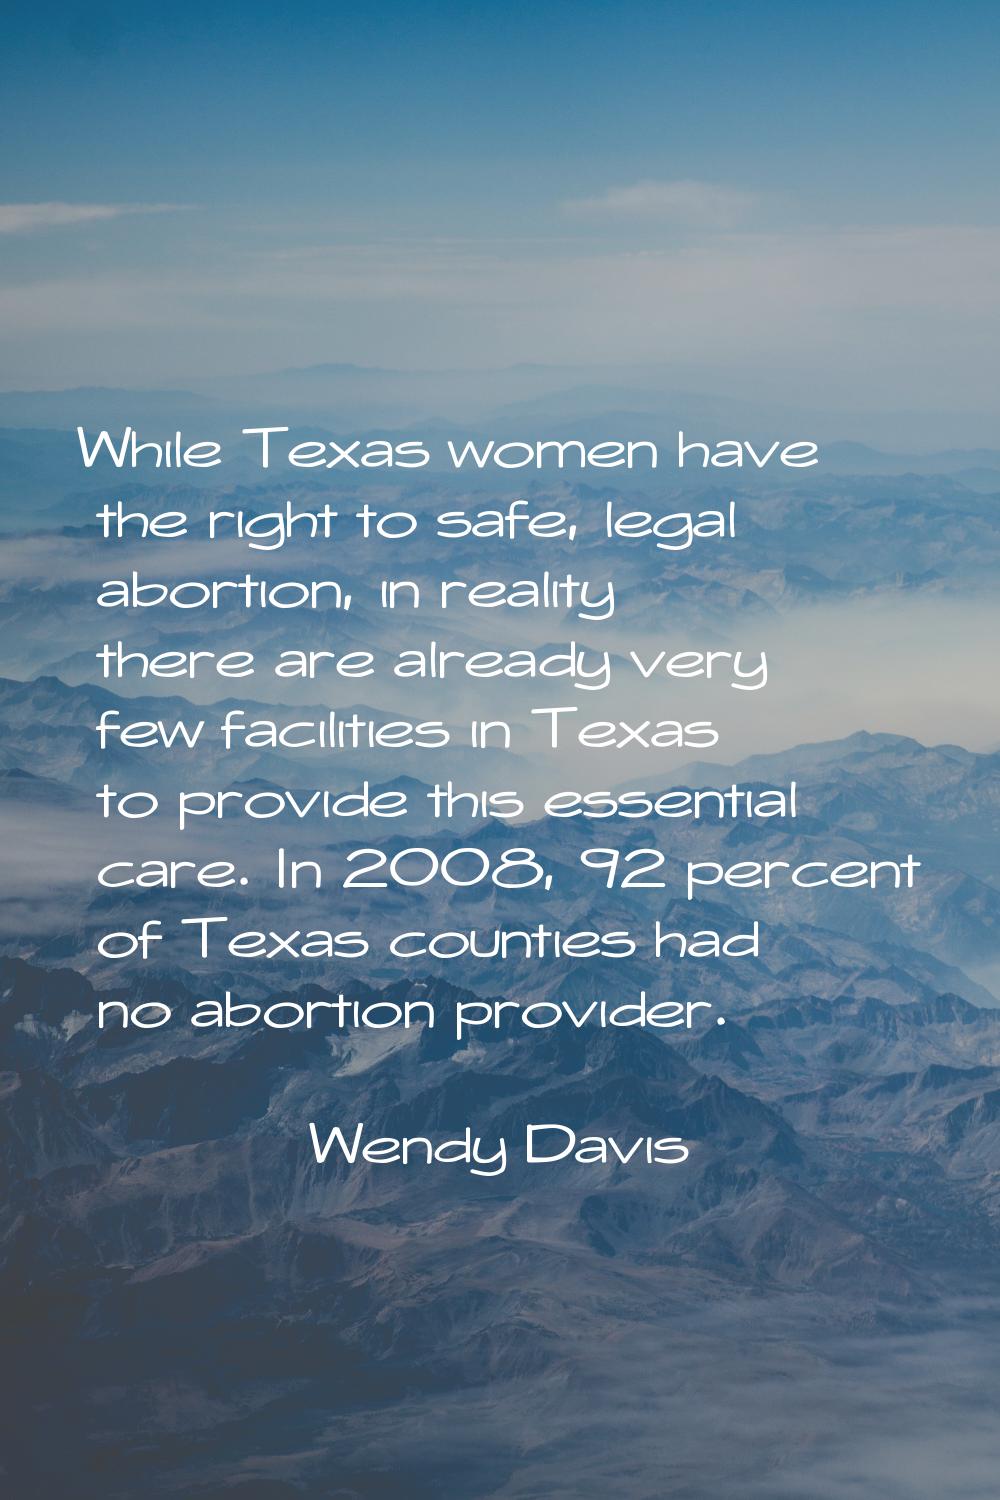 While Texas women have the right to safe, legal abortion, in reality there are already very few fac